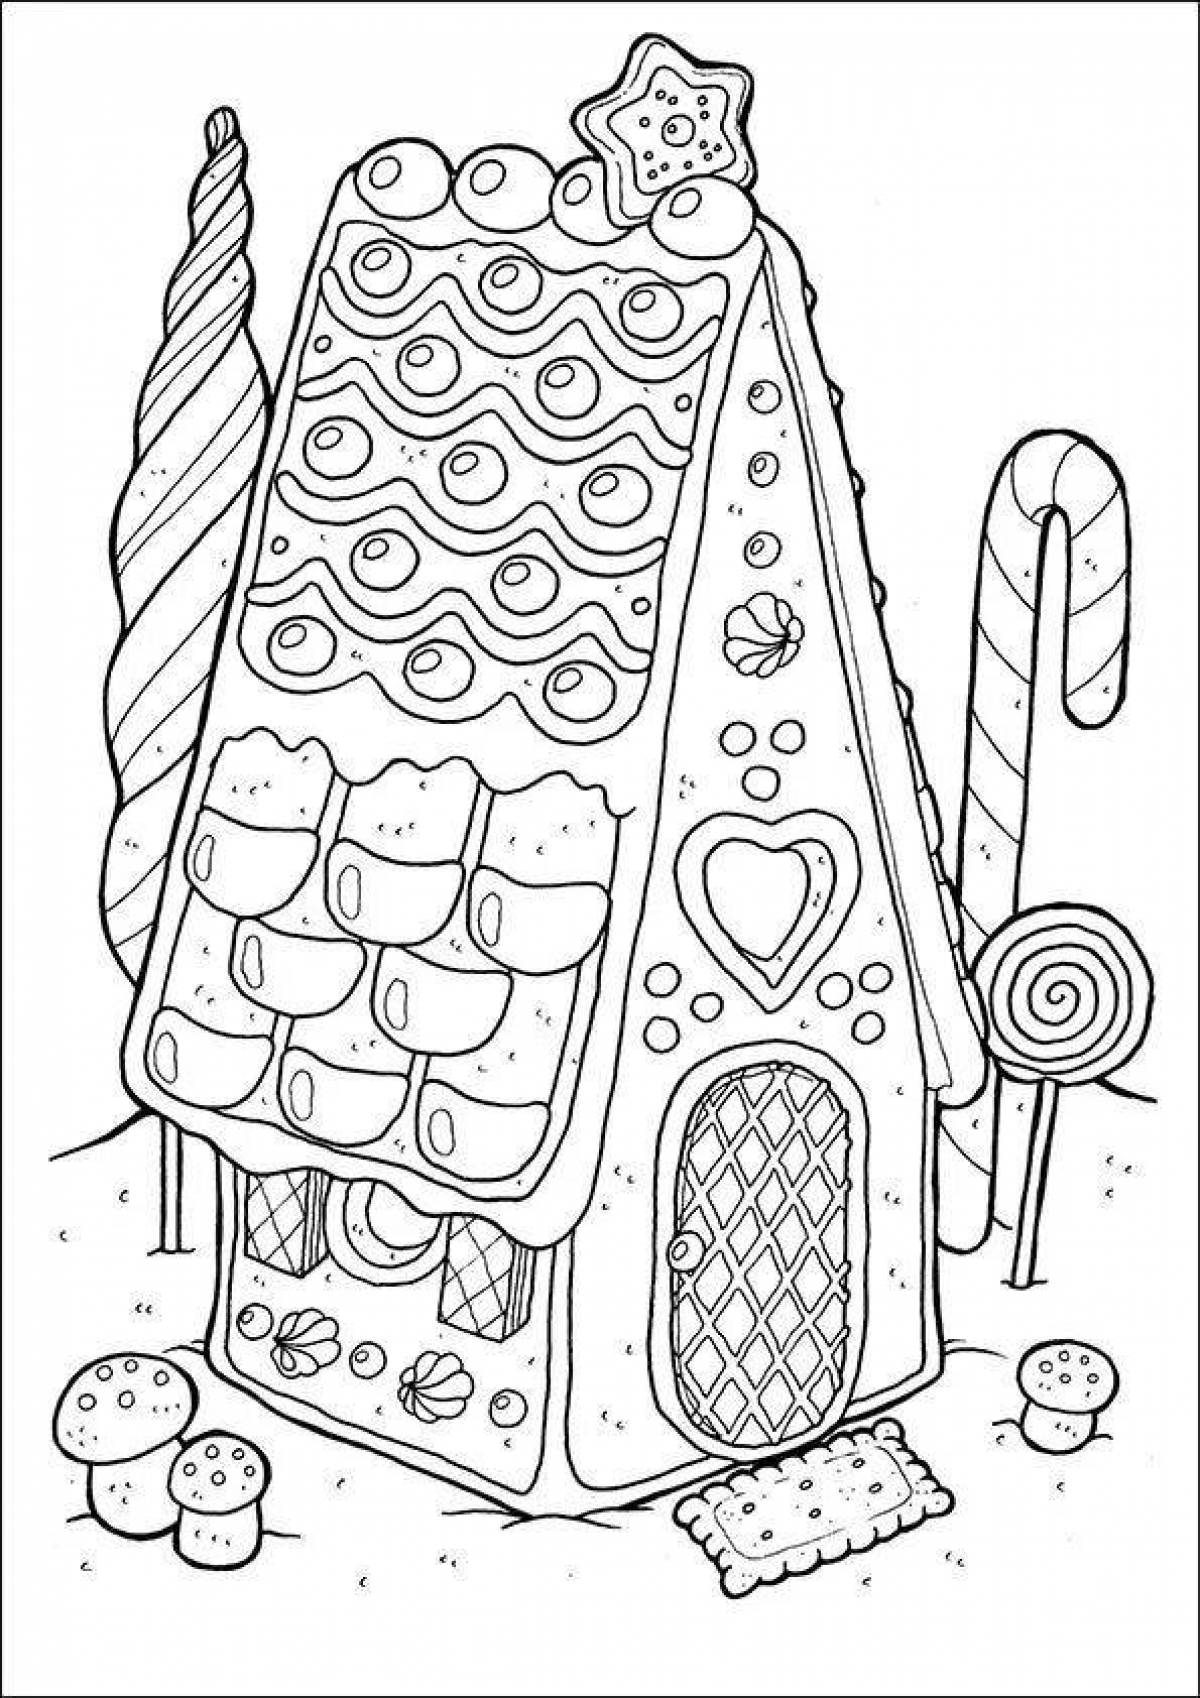 Gingerbread Live Coloring Page